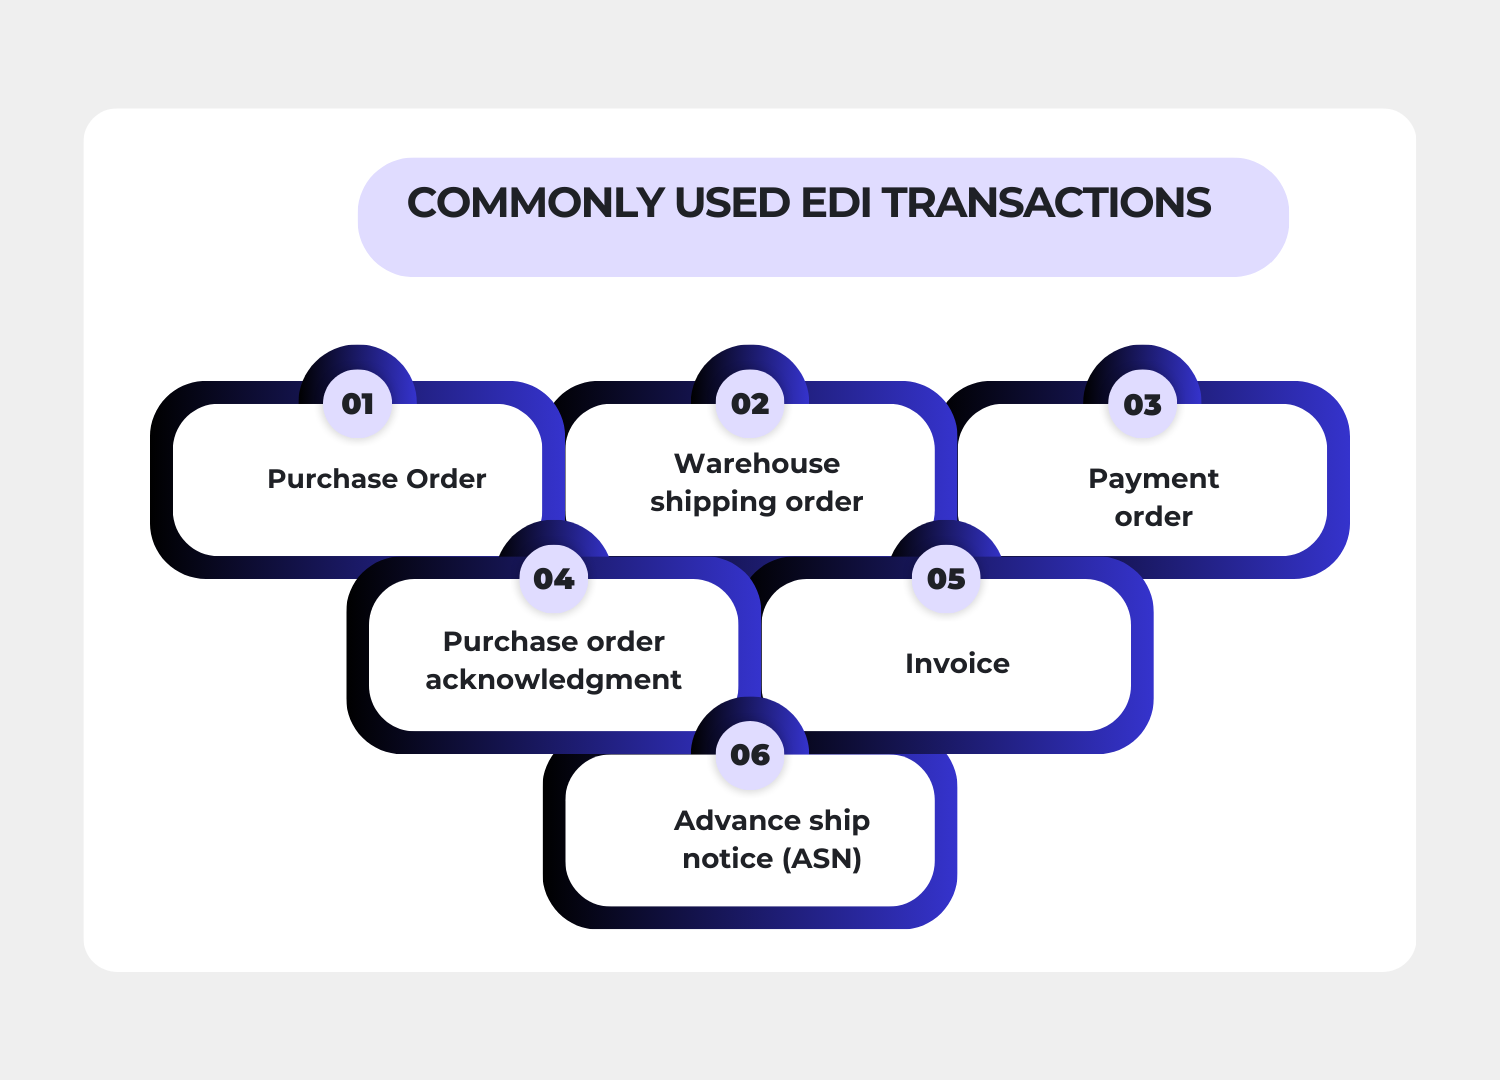 Commonly used EDI transactions